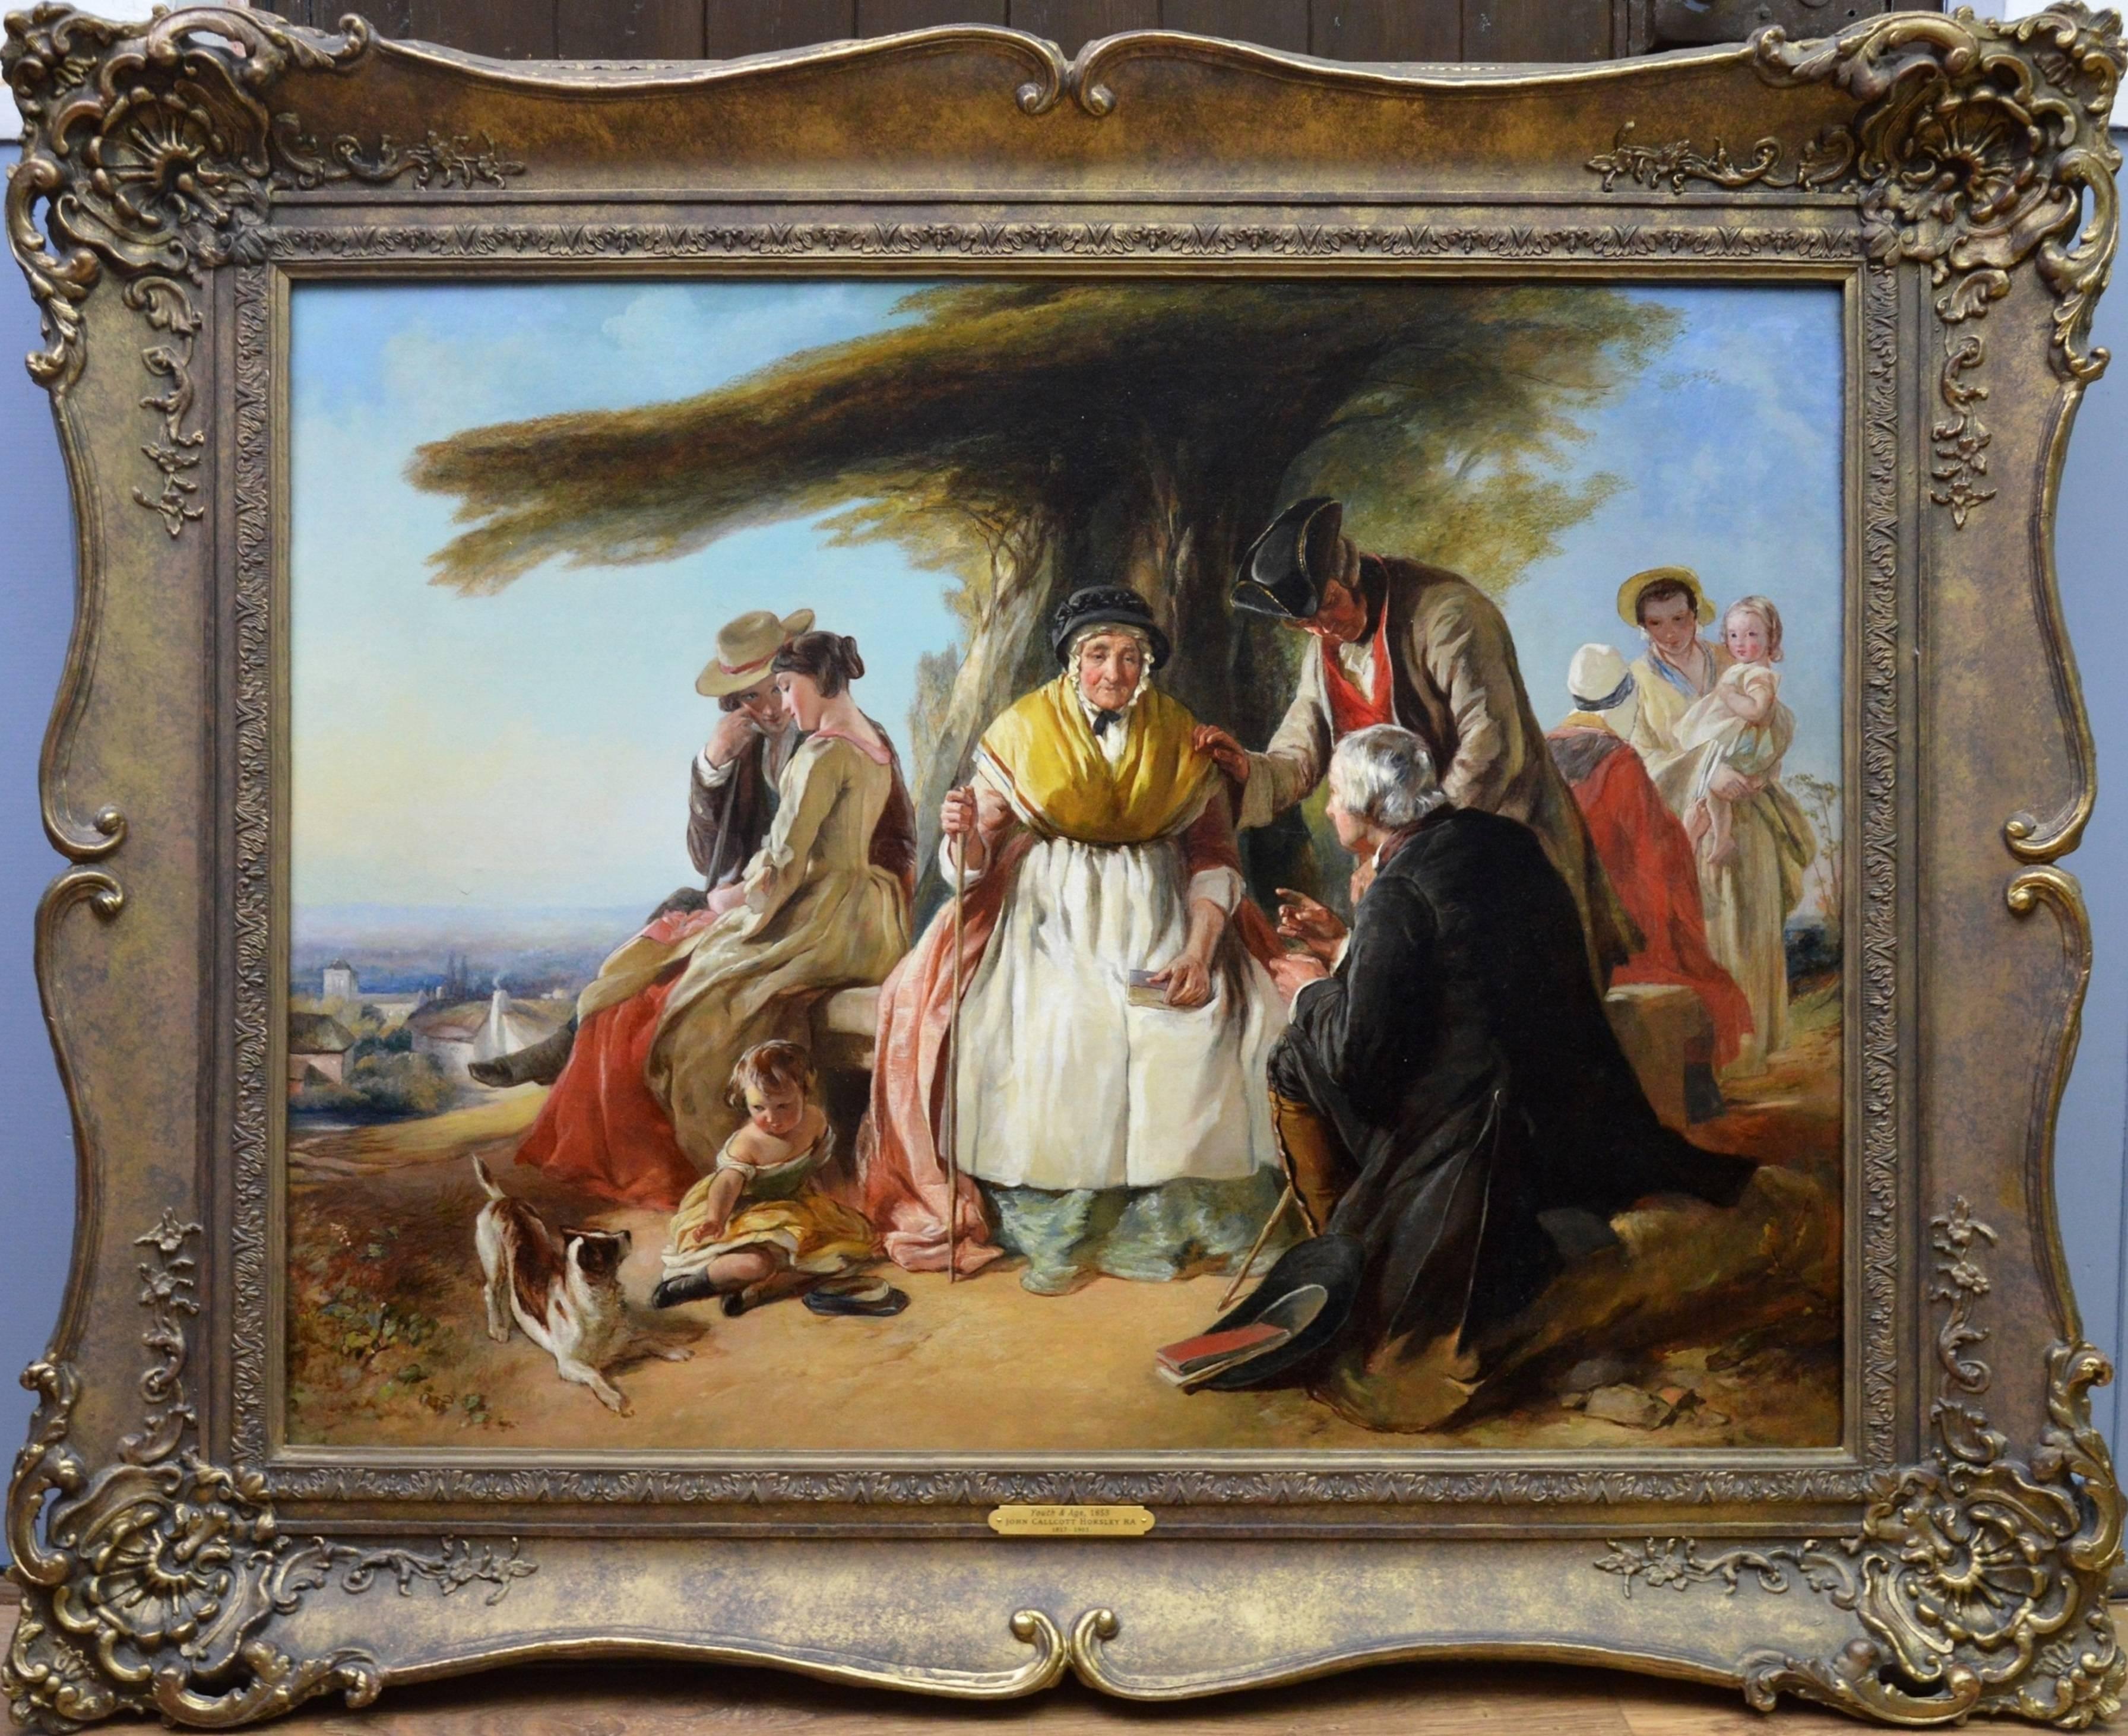 John Callcott Horsley Landscape Painting - Youth & Age - Large 19th Century Oil Painting - Royal Academy 1851 - Victorian